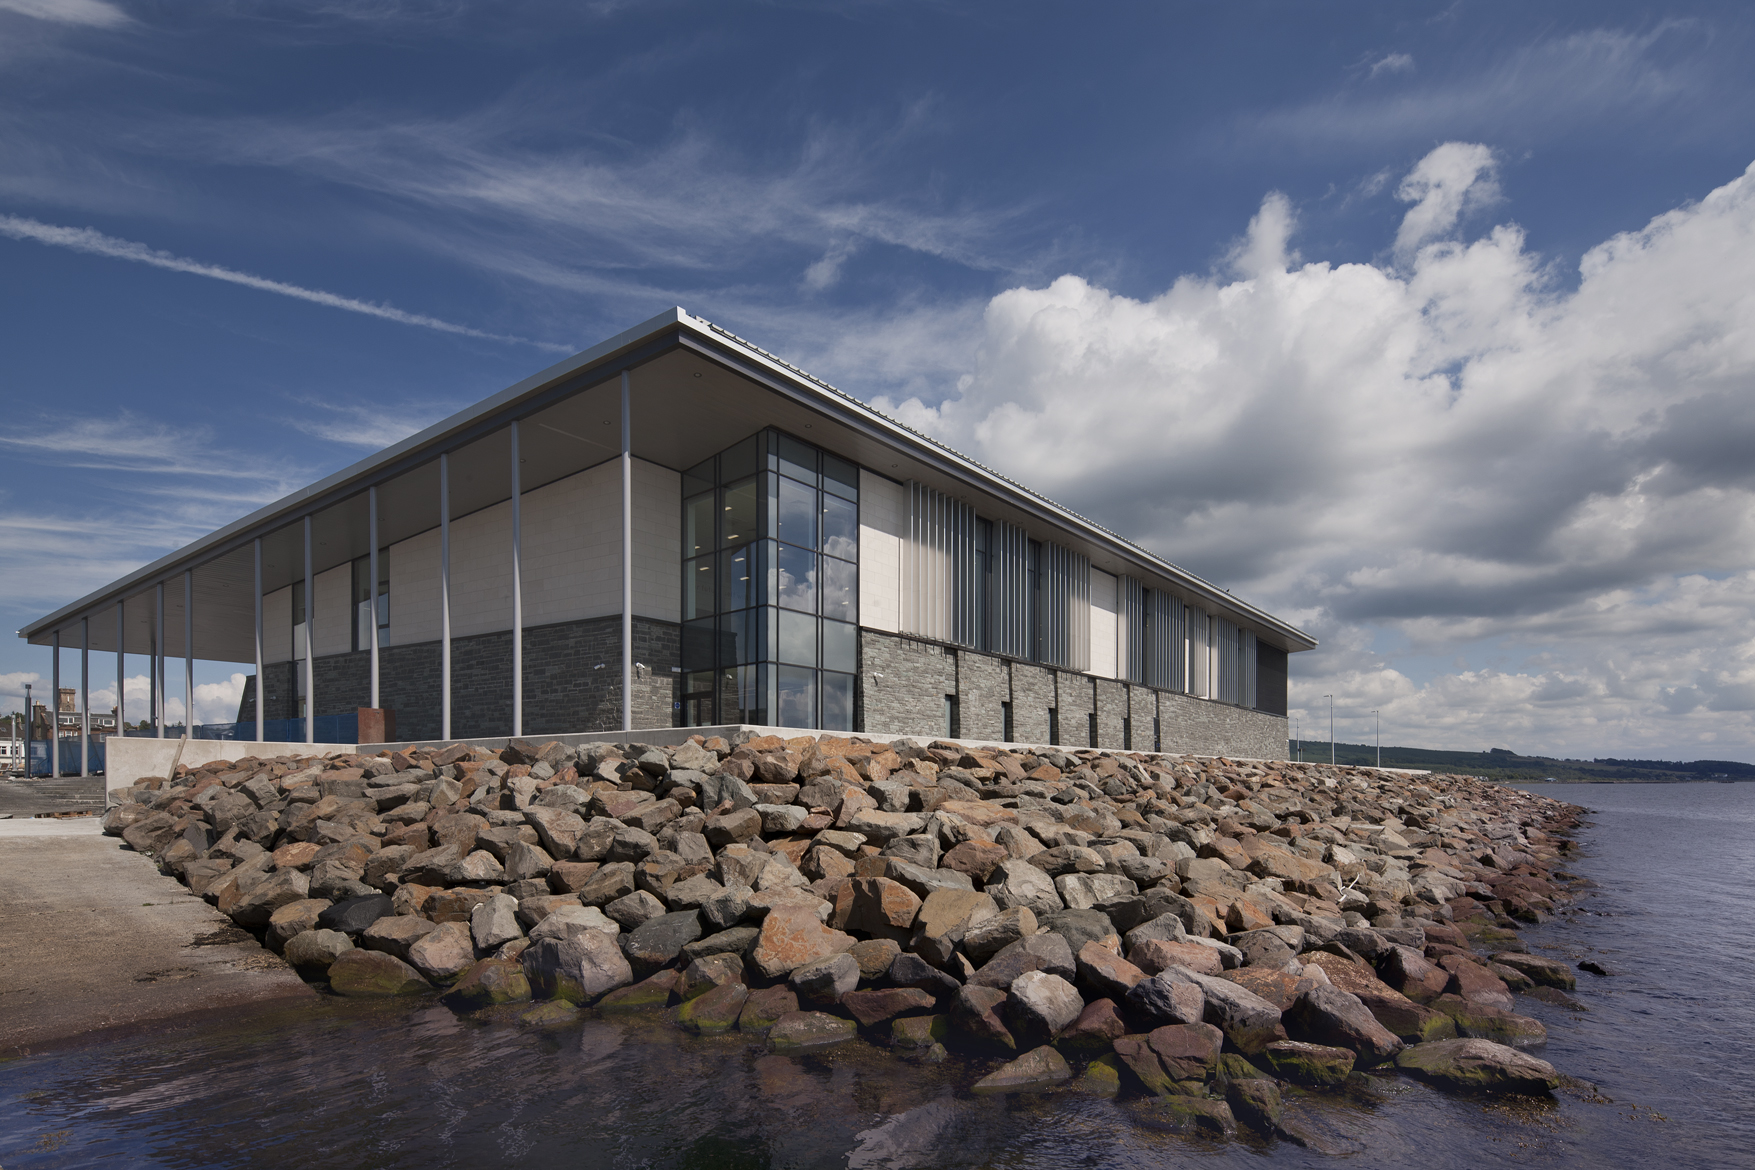 World champion opening for Helensburgh’s new leisure centre